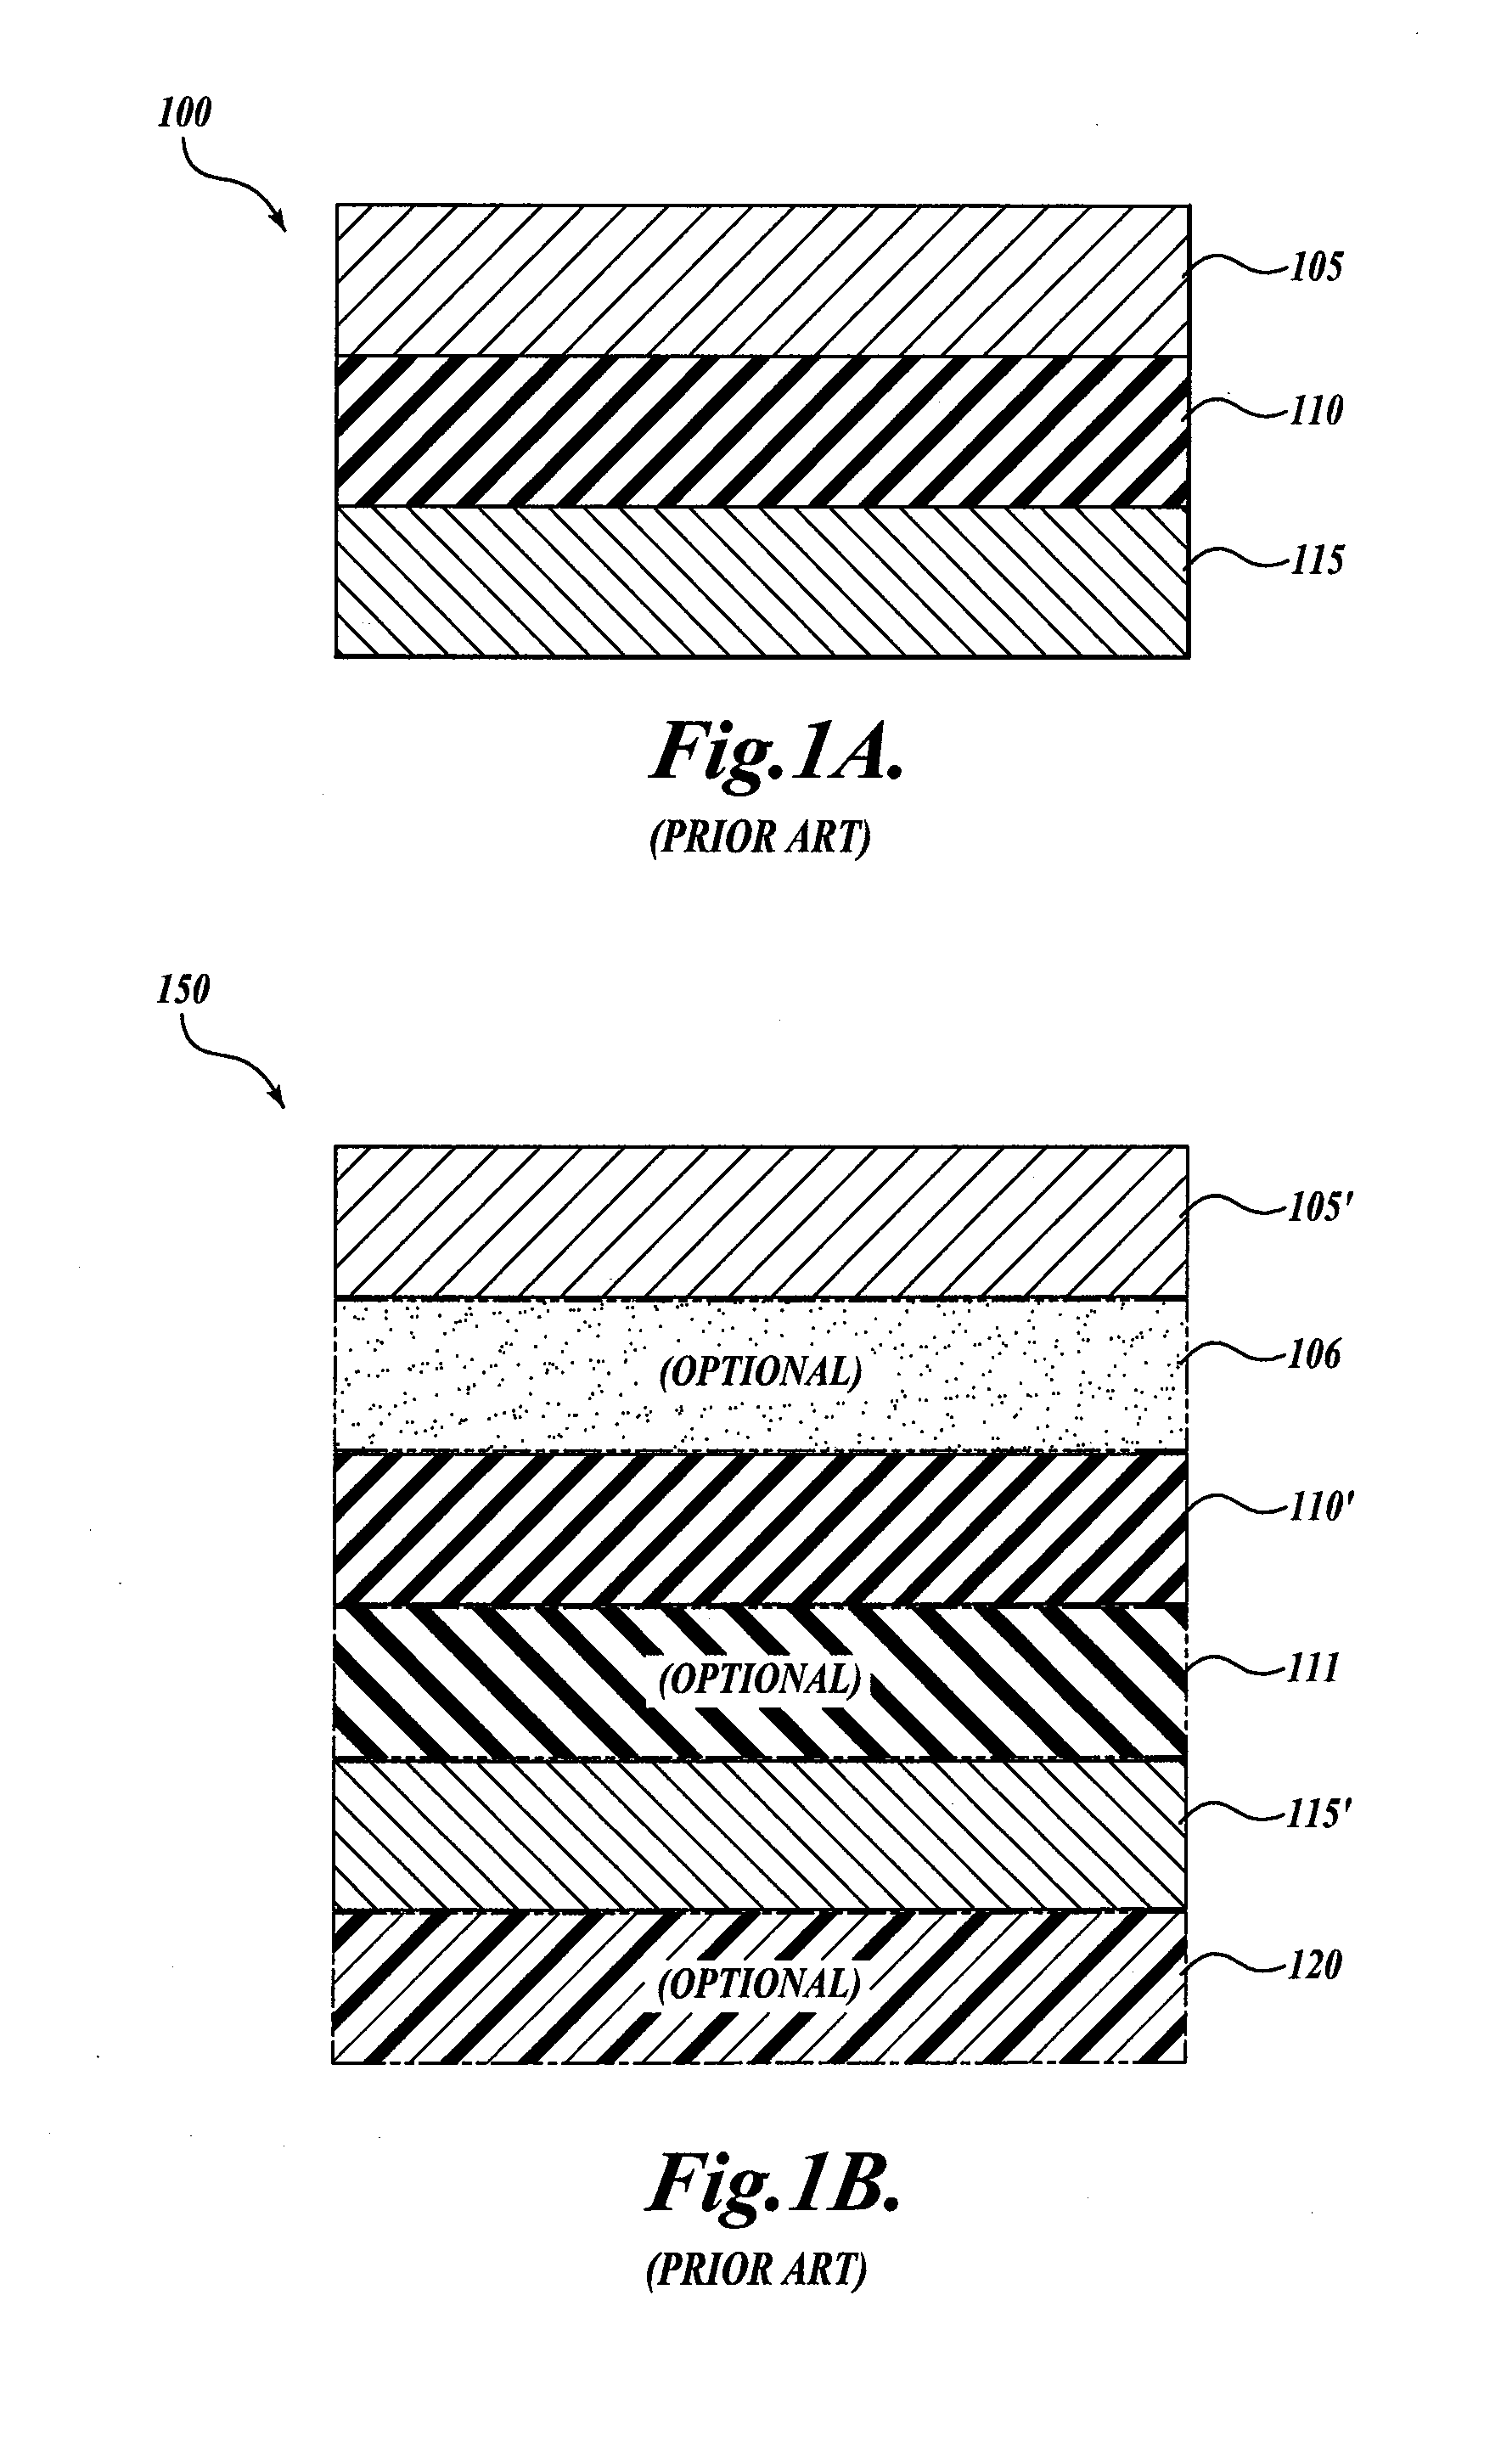 Photovoltaic devices having metal oxide electron-transport layers